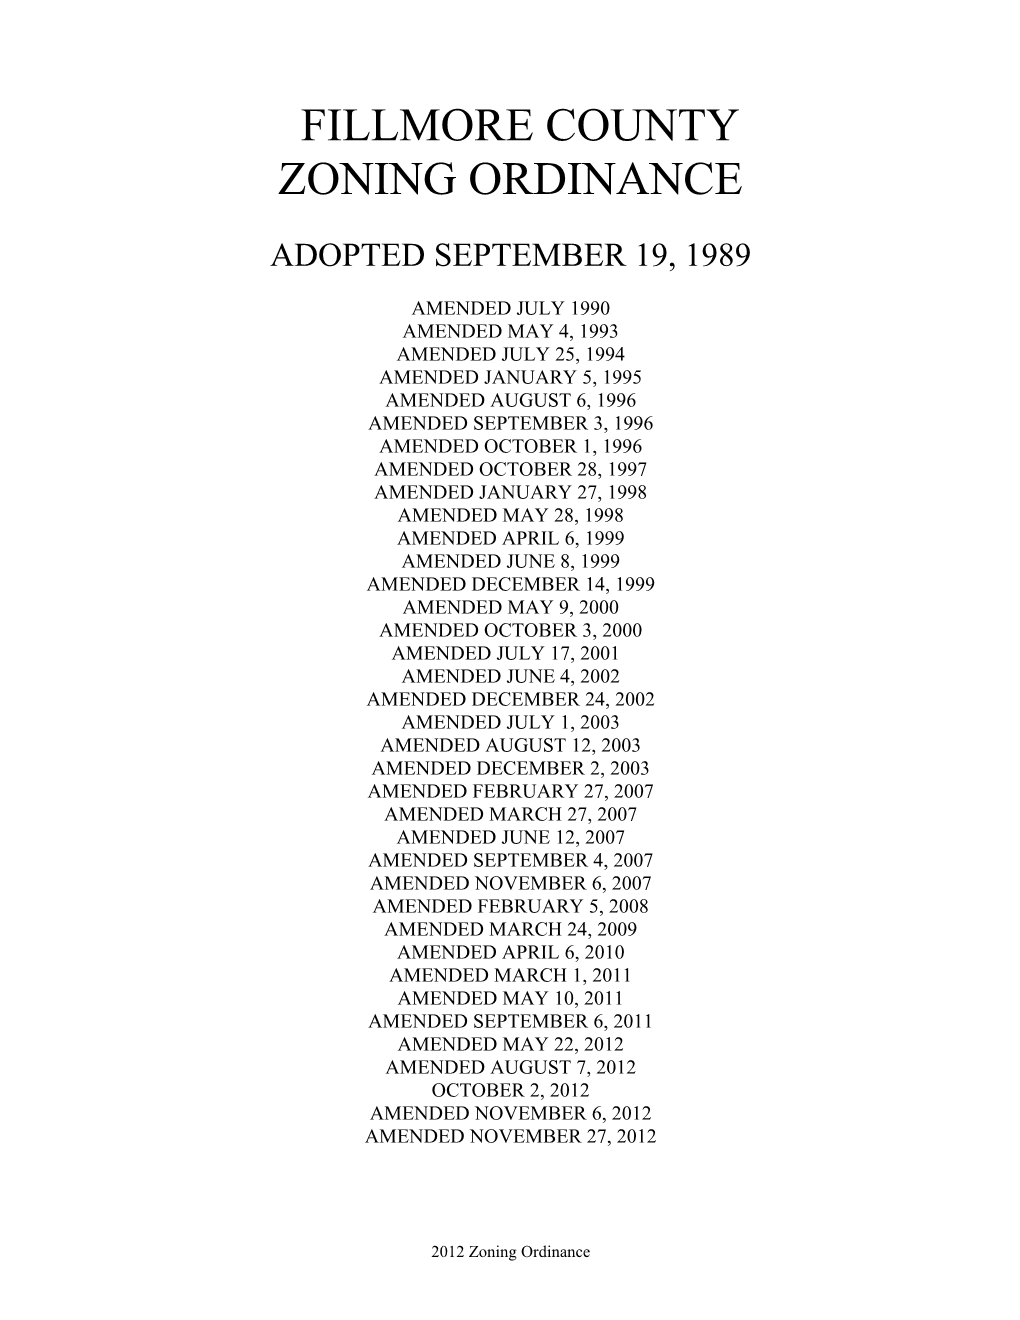 Fillmore County Zoning Ordinance